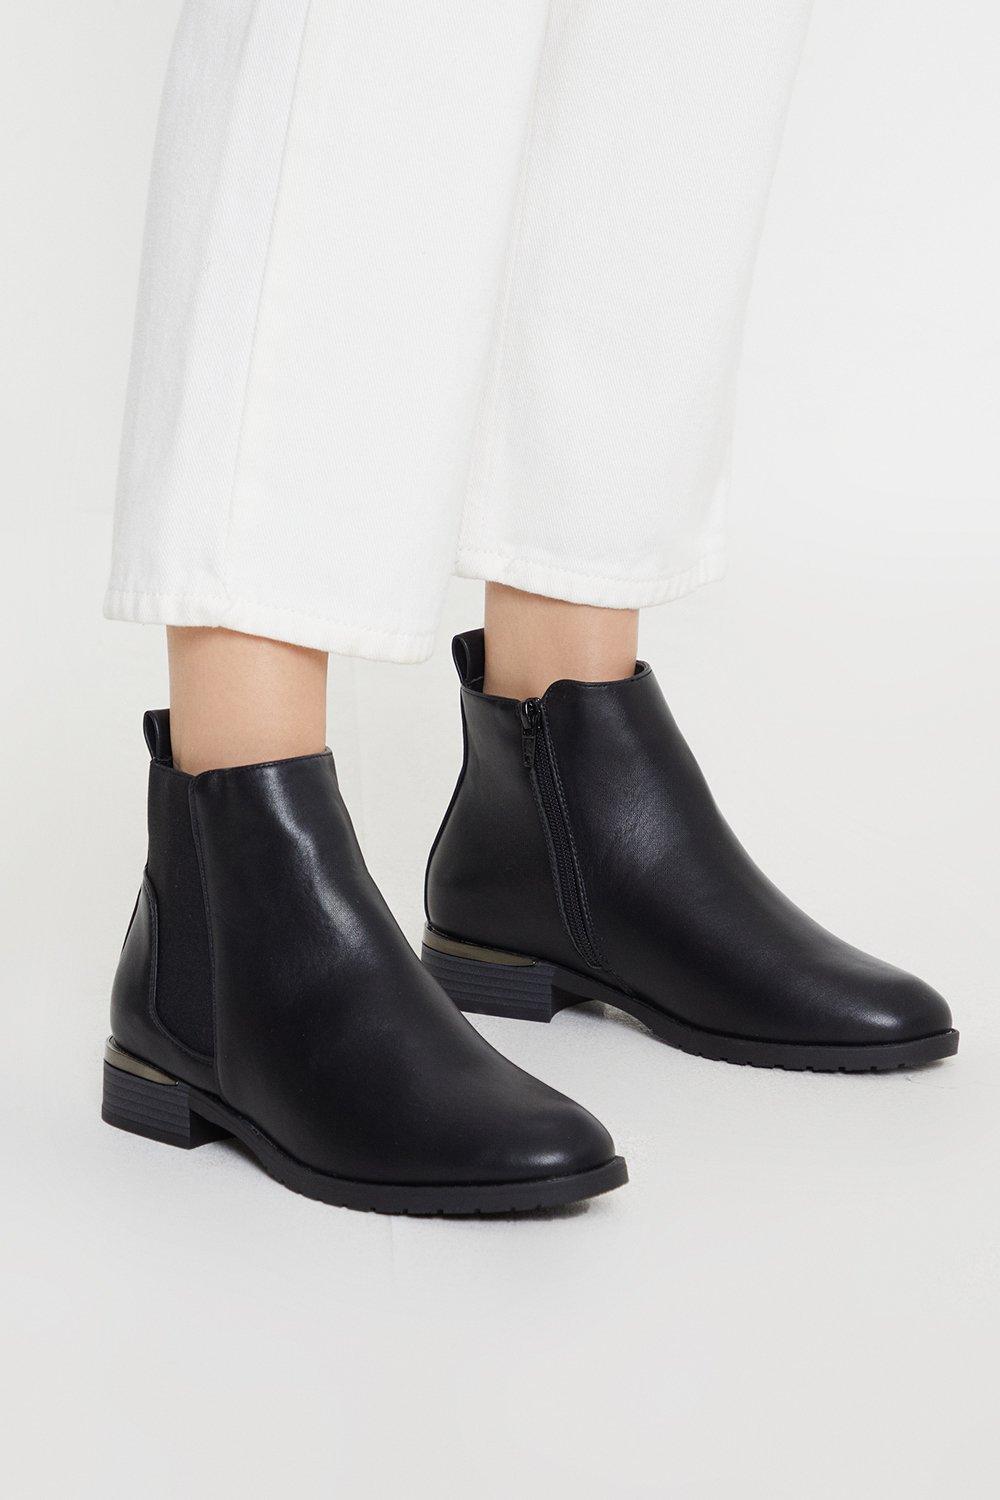 Womens Good For The Sole: Wide Fit Molly Comfort Chelsea Boots